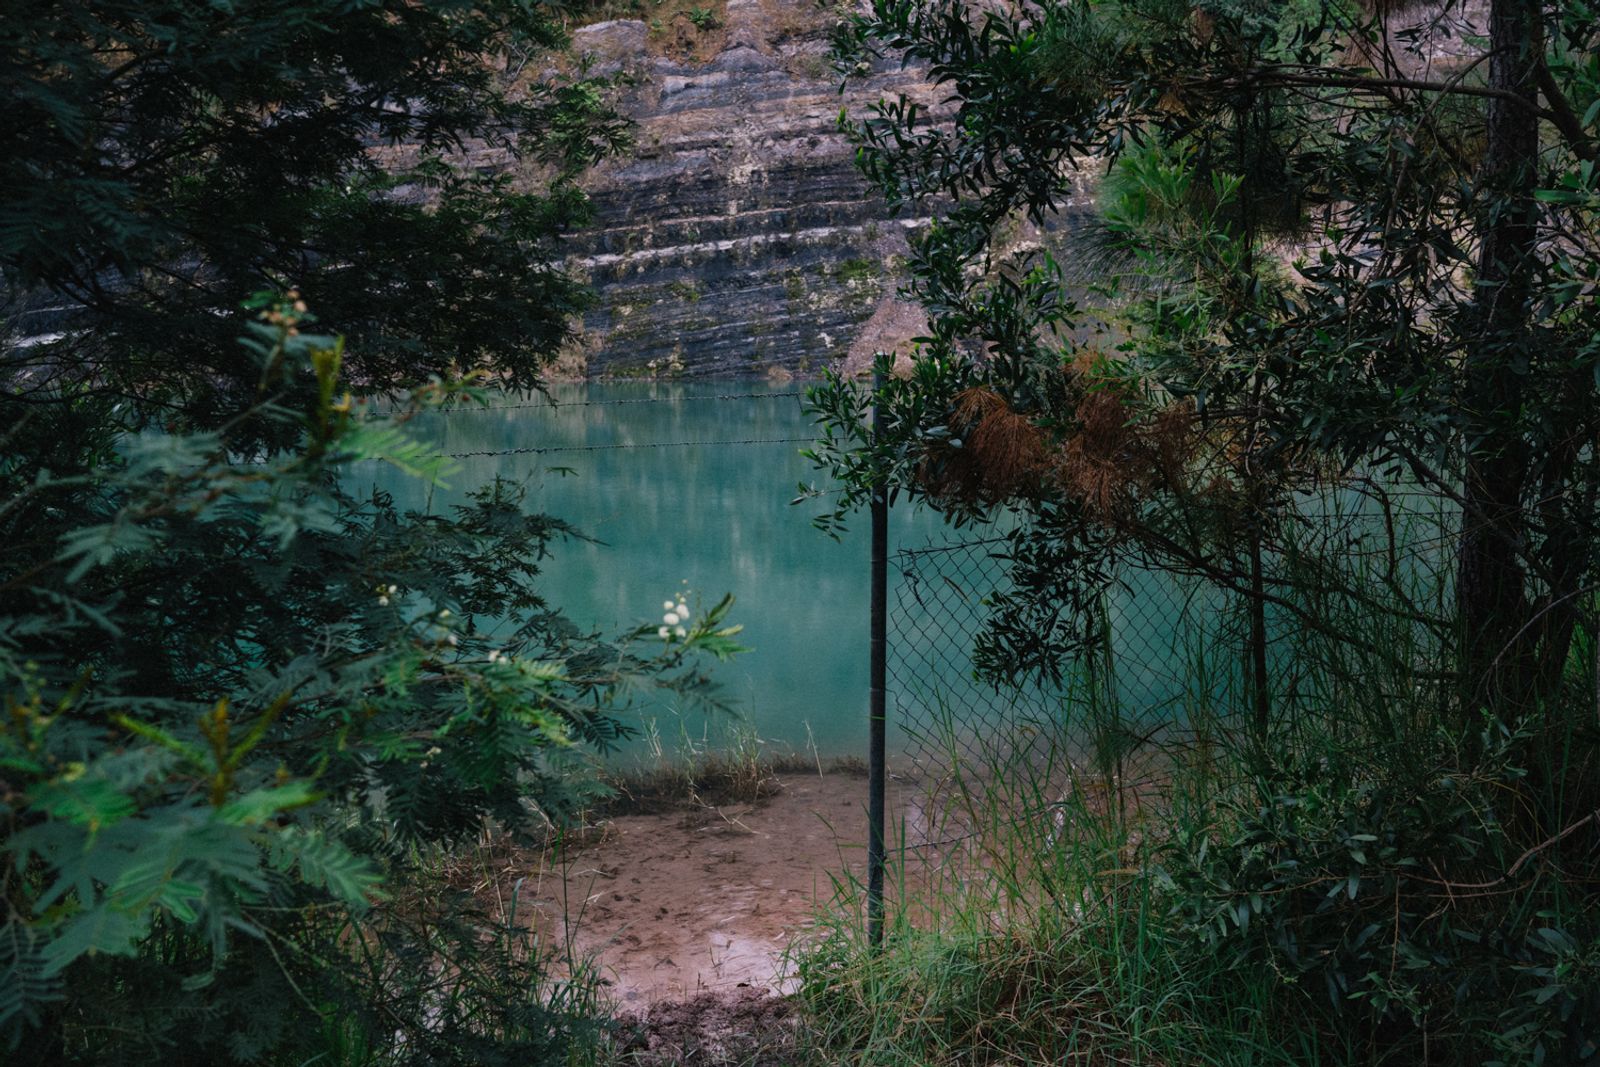 © Tajette O'halloran - View from the remaining fence surrounding the quarry